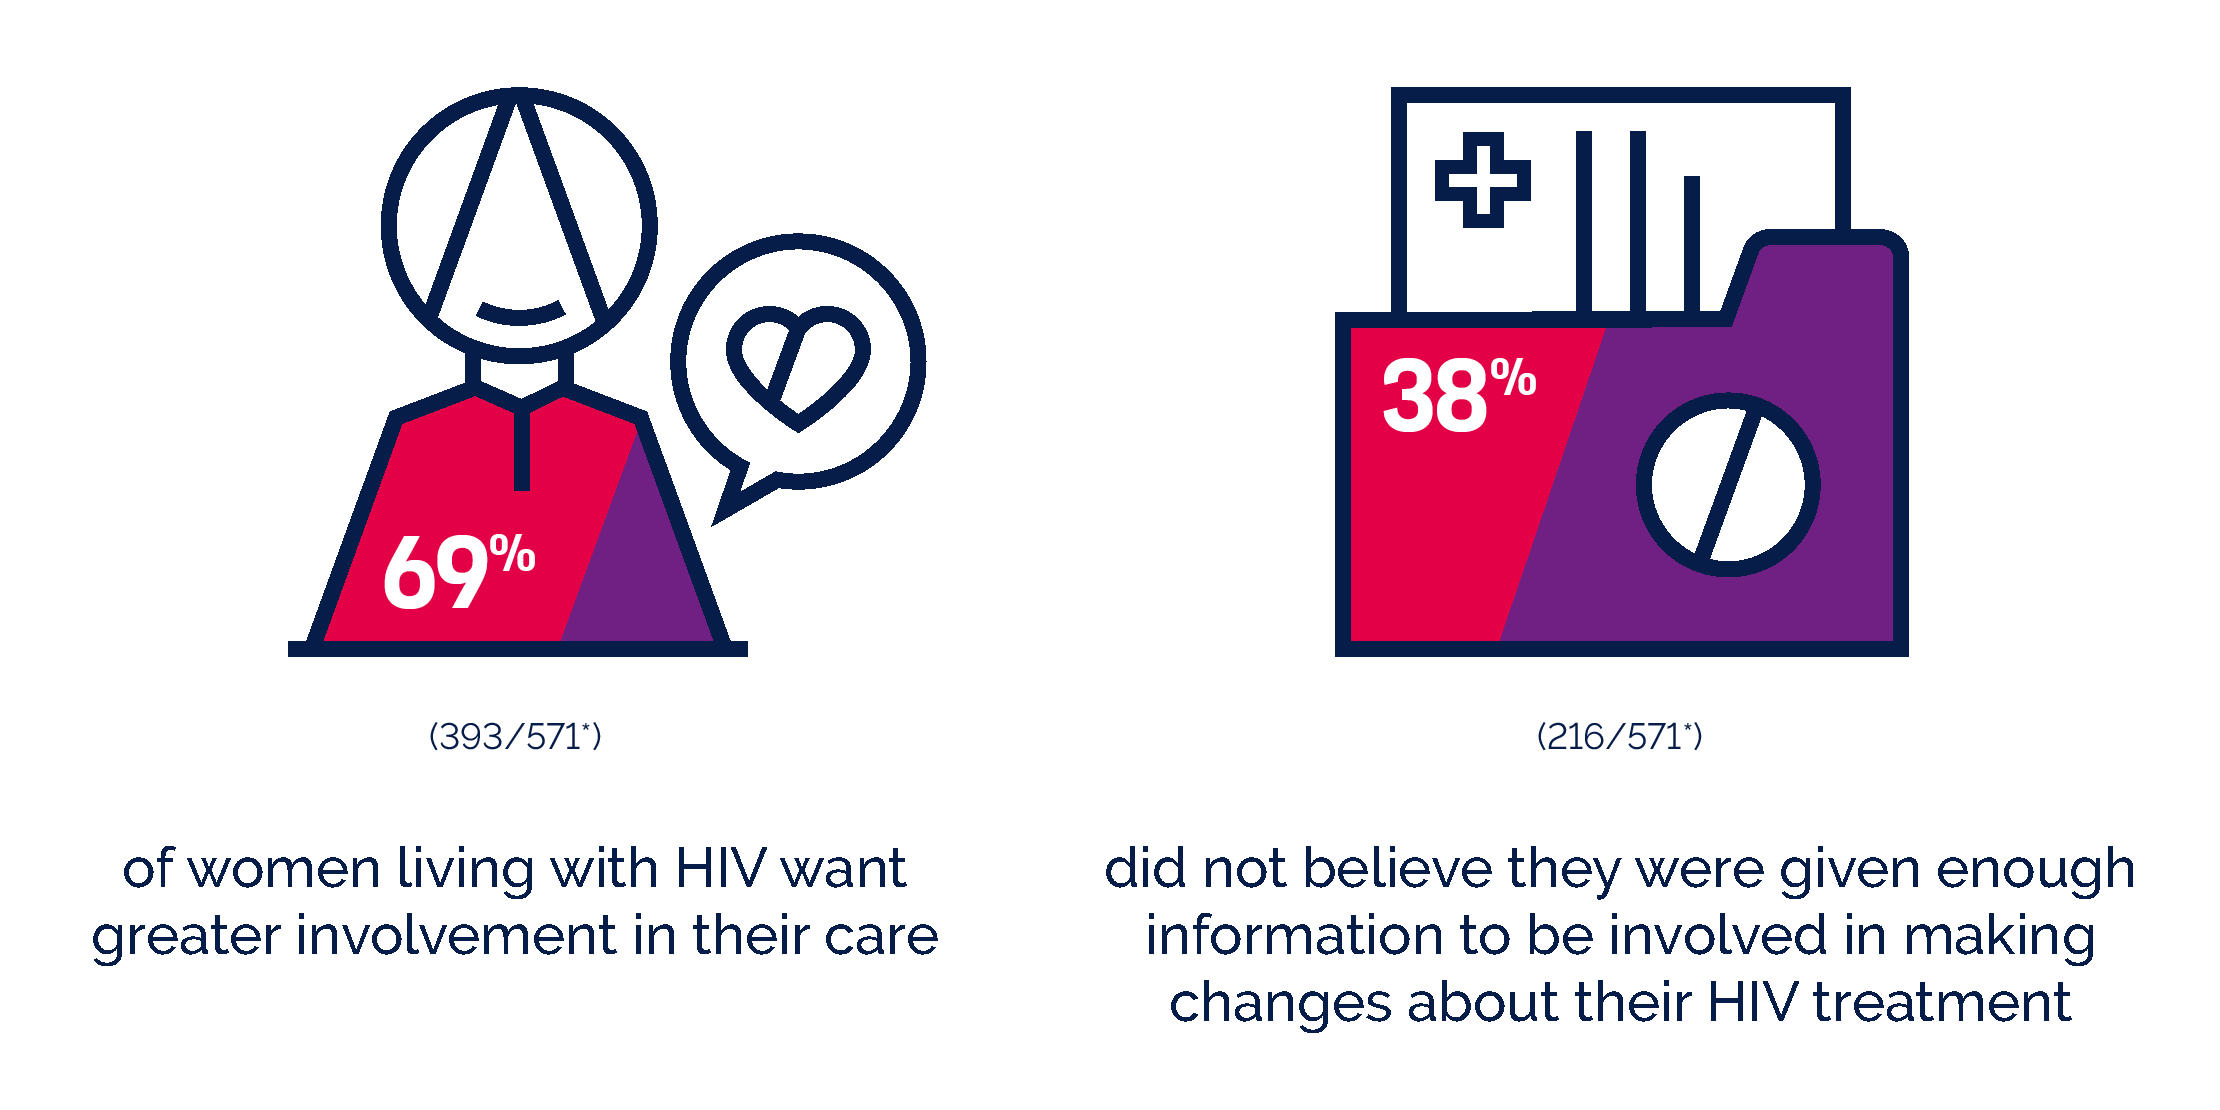 Women and HIV